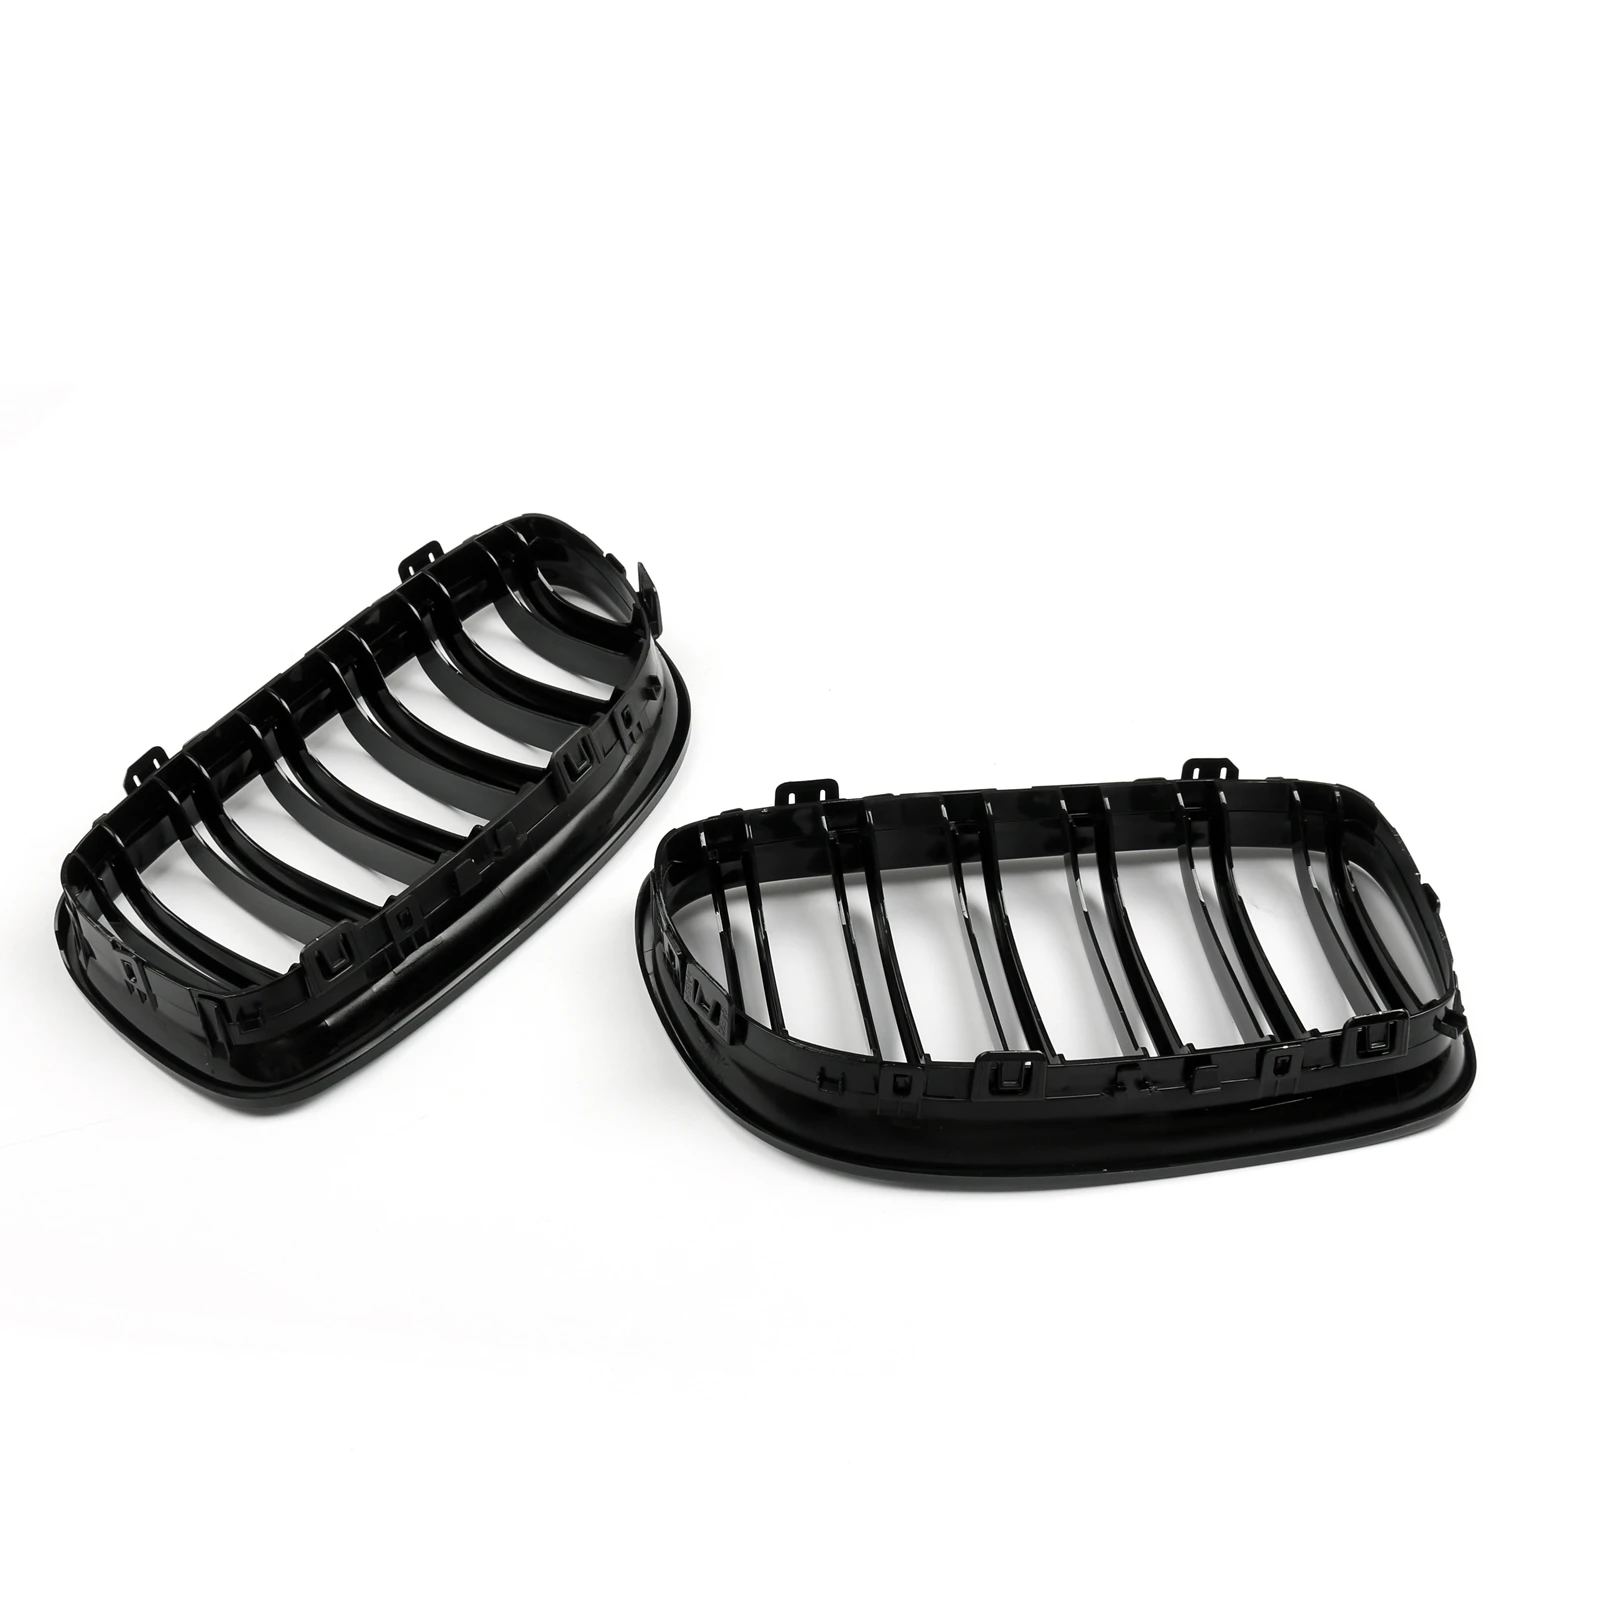 

Areyourshop Front Kidney Hood Grilles Gloss Black For BMW E90/E91 LCI 3 Series 2008 2009 2010 2011 2012, Gblack